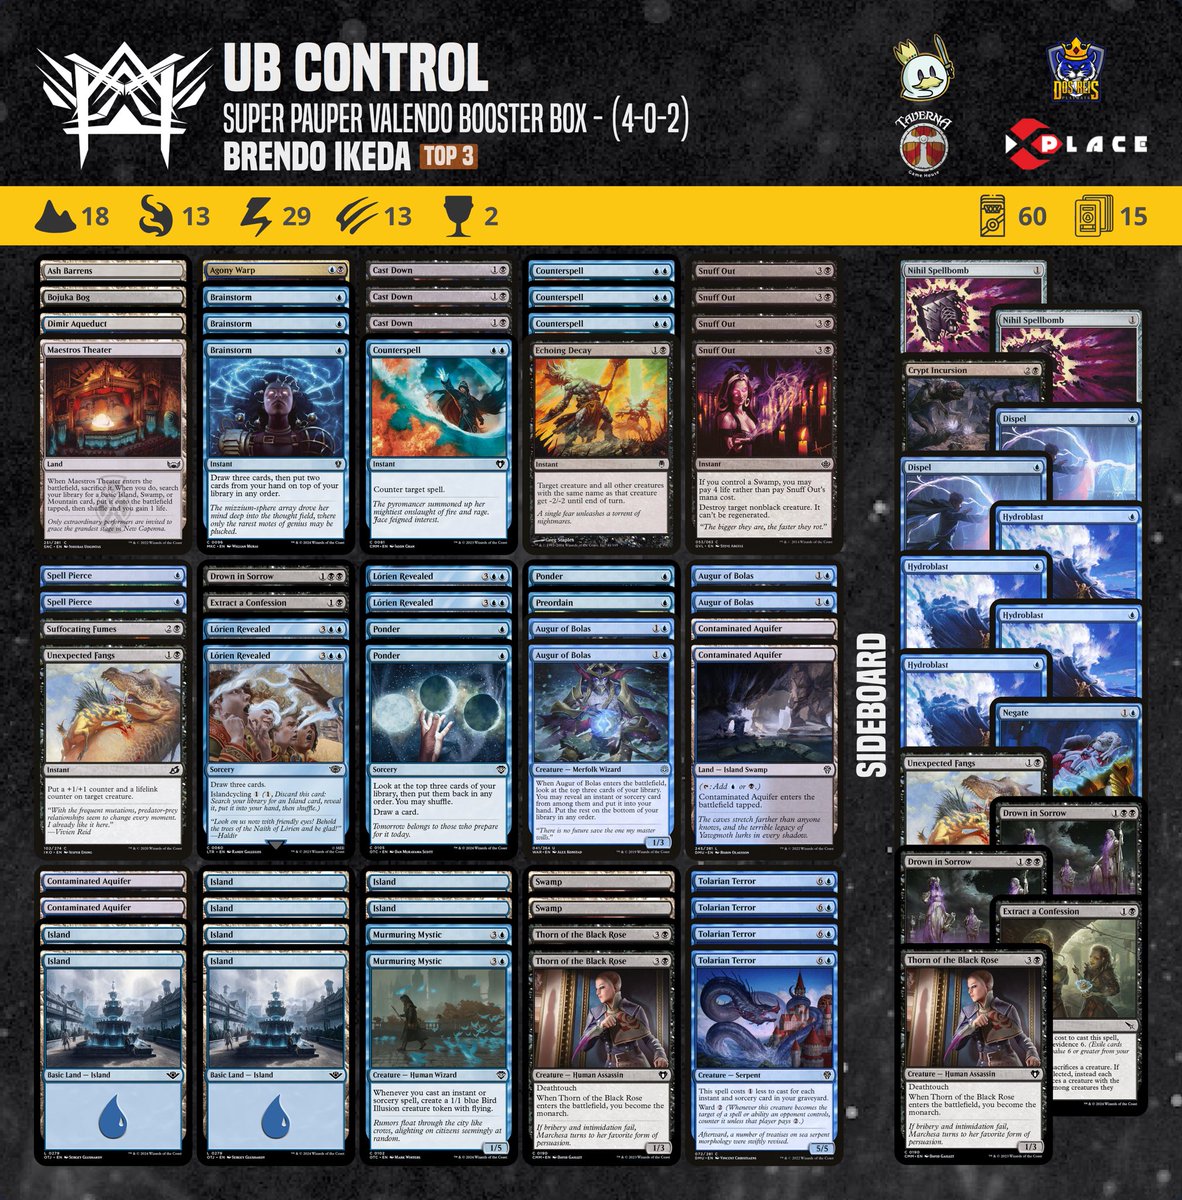 To kick off the week, our Captain Brendo Ikeda secured a top 3 finish in the Super Pauper Tournament Valendo Booster Box with this UB Control decklist. #pauper #magic #mtgcommon #metagamepauper #mtgpauper #magicthegathering #wizardsofthecoast @PauperDecklists @fireshoes